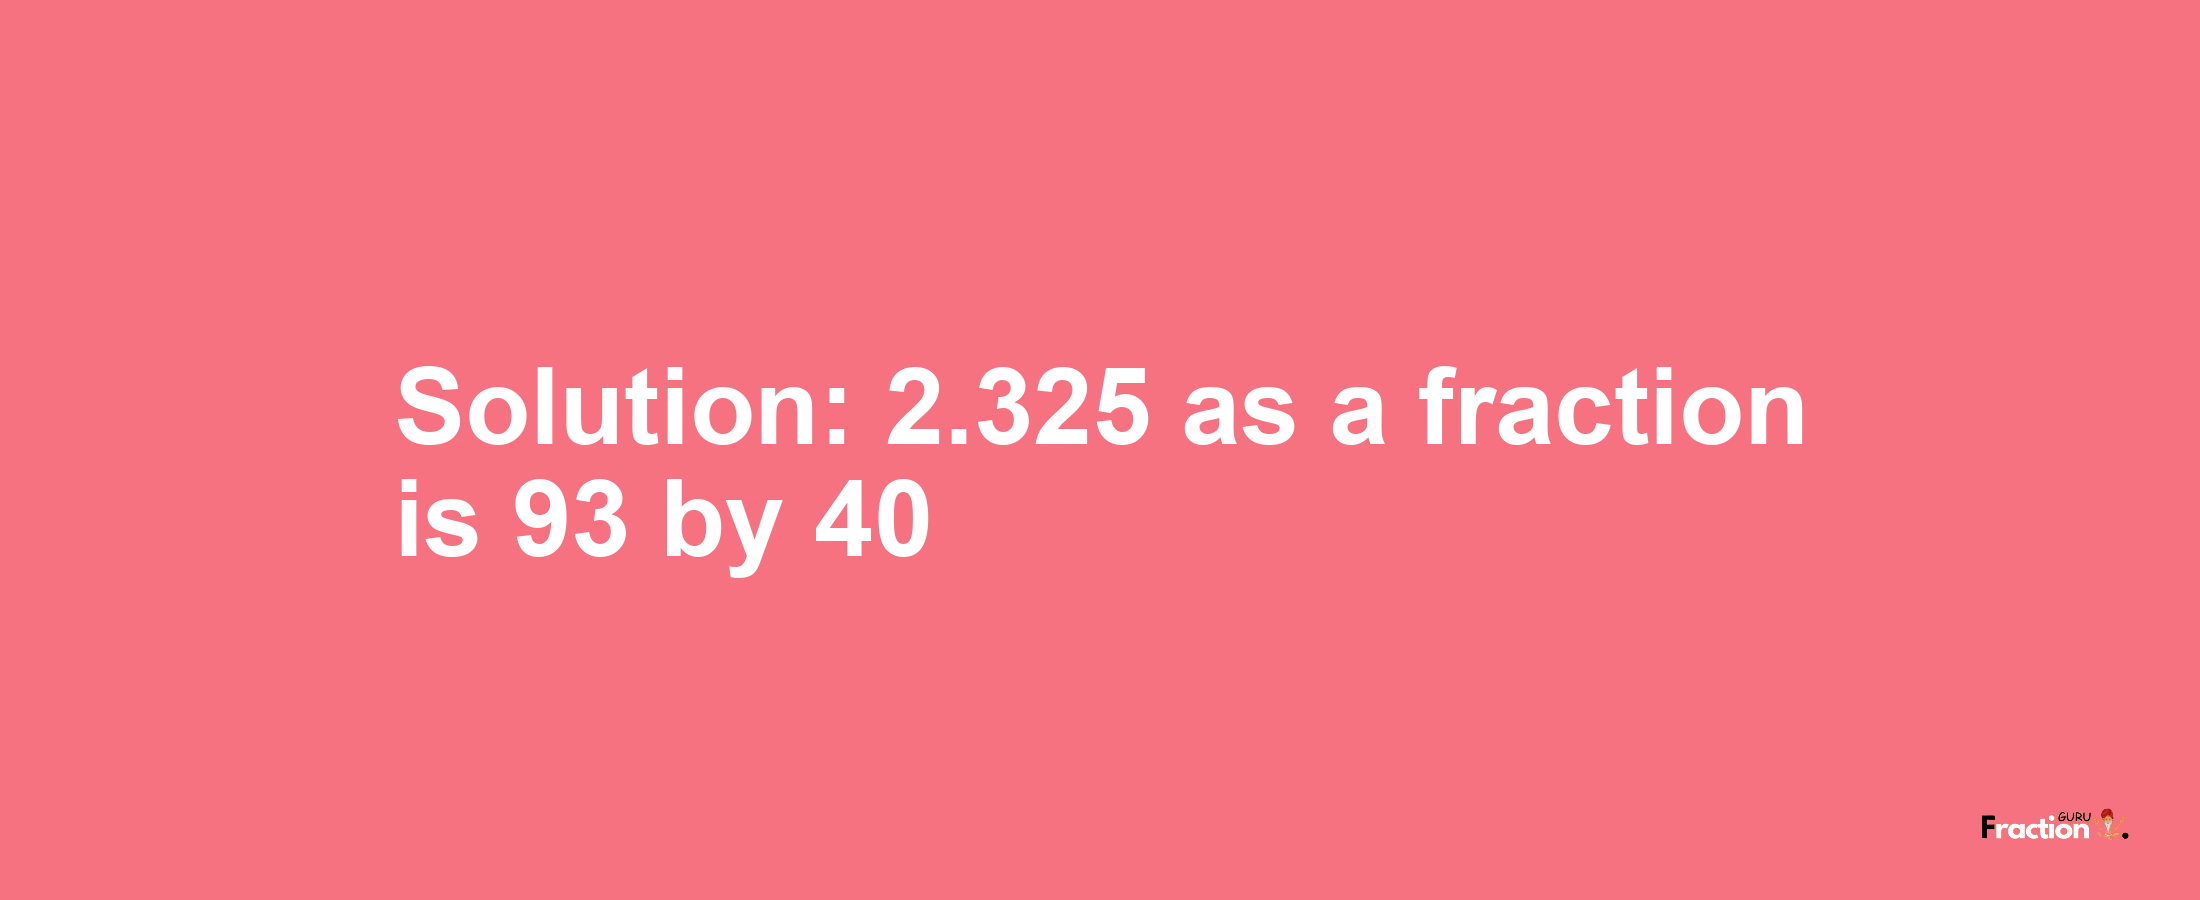 Solution:2.325 as a fraction is 93/40